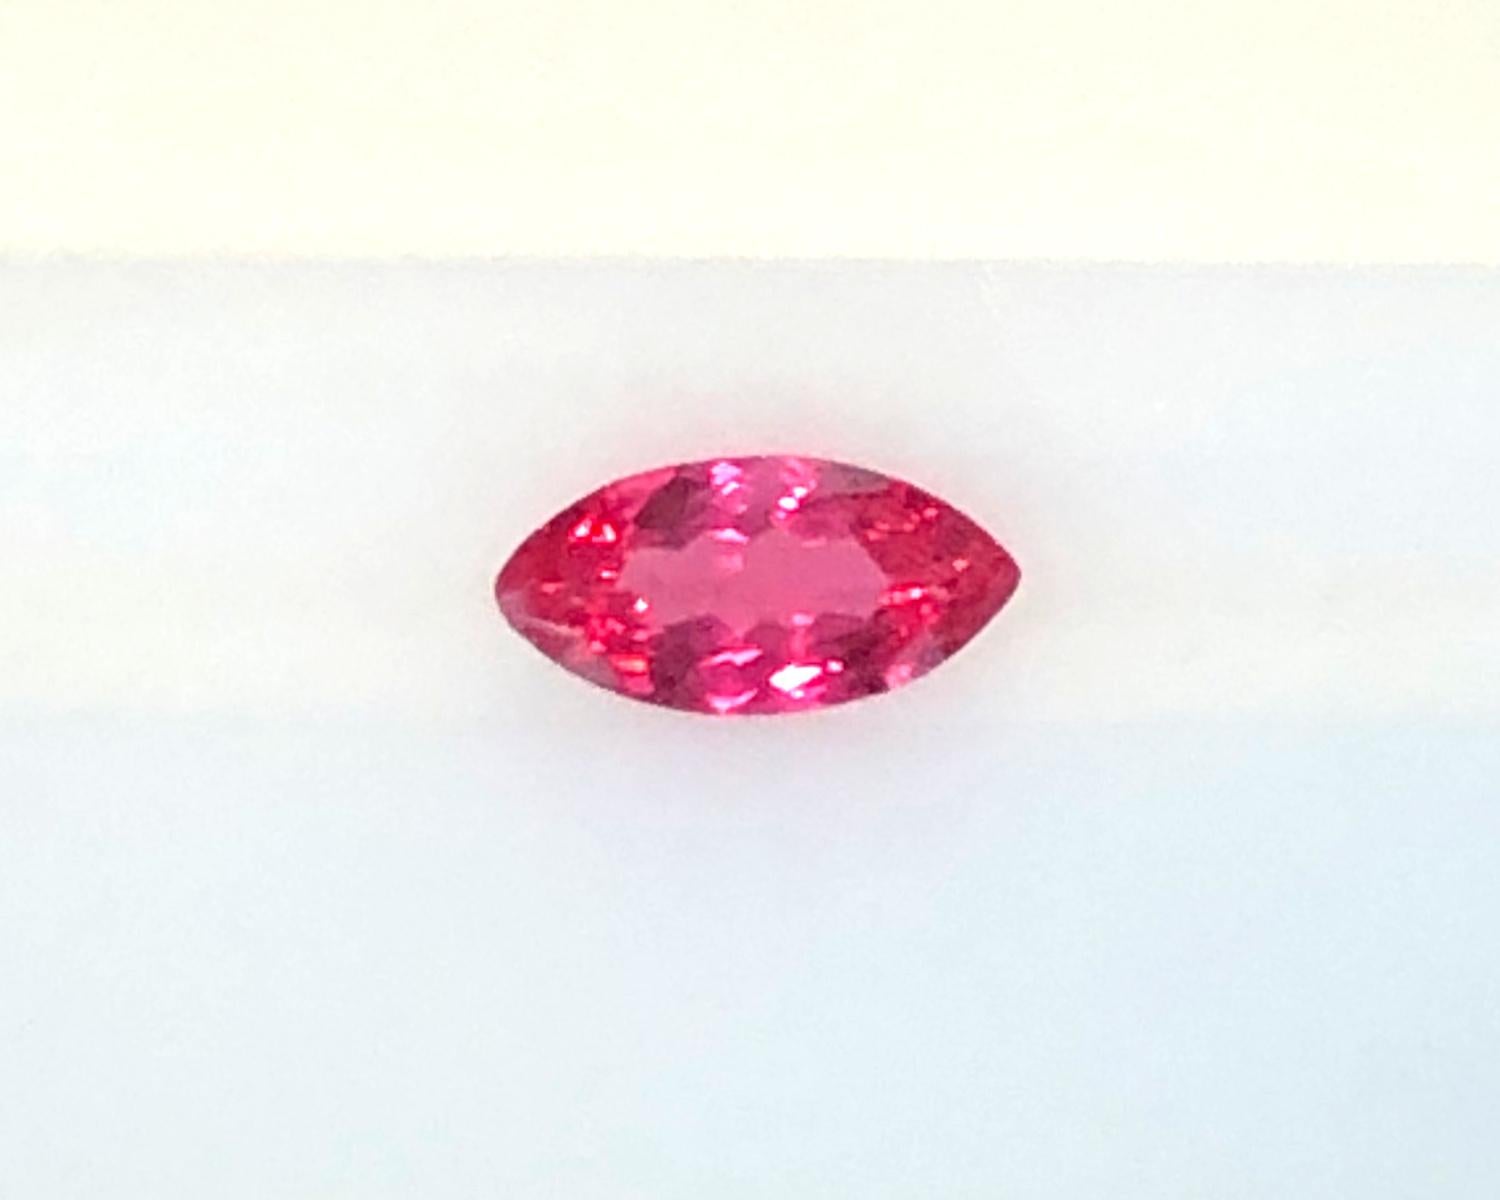 Privately Curated Collection of Unset Loose Fancy Spinel Gemstones, 89.77 Carats 3